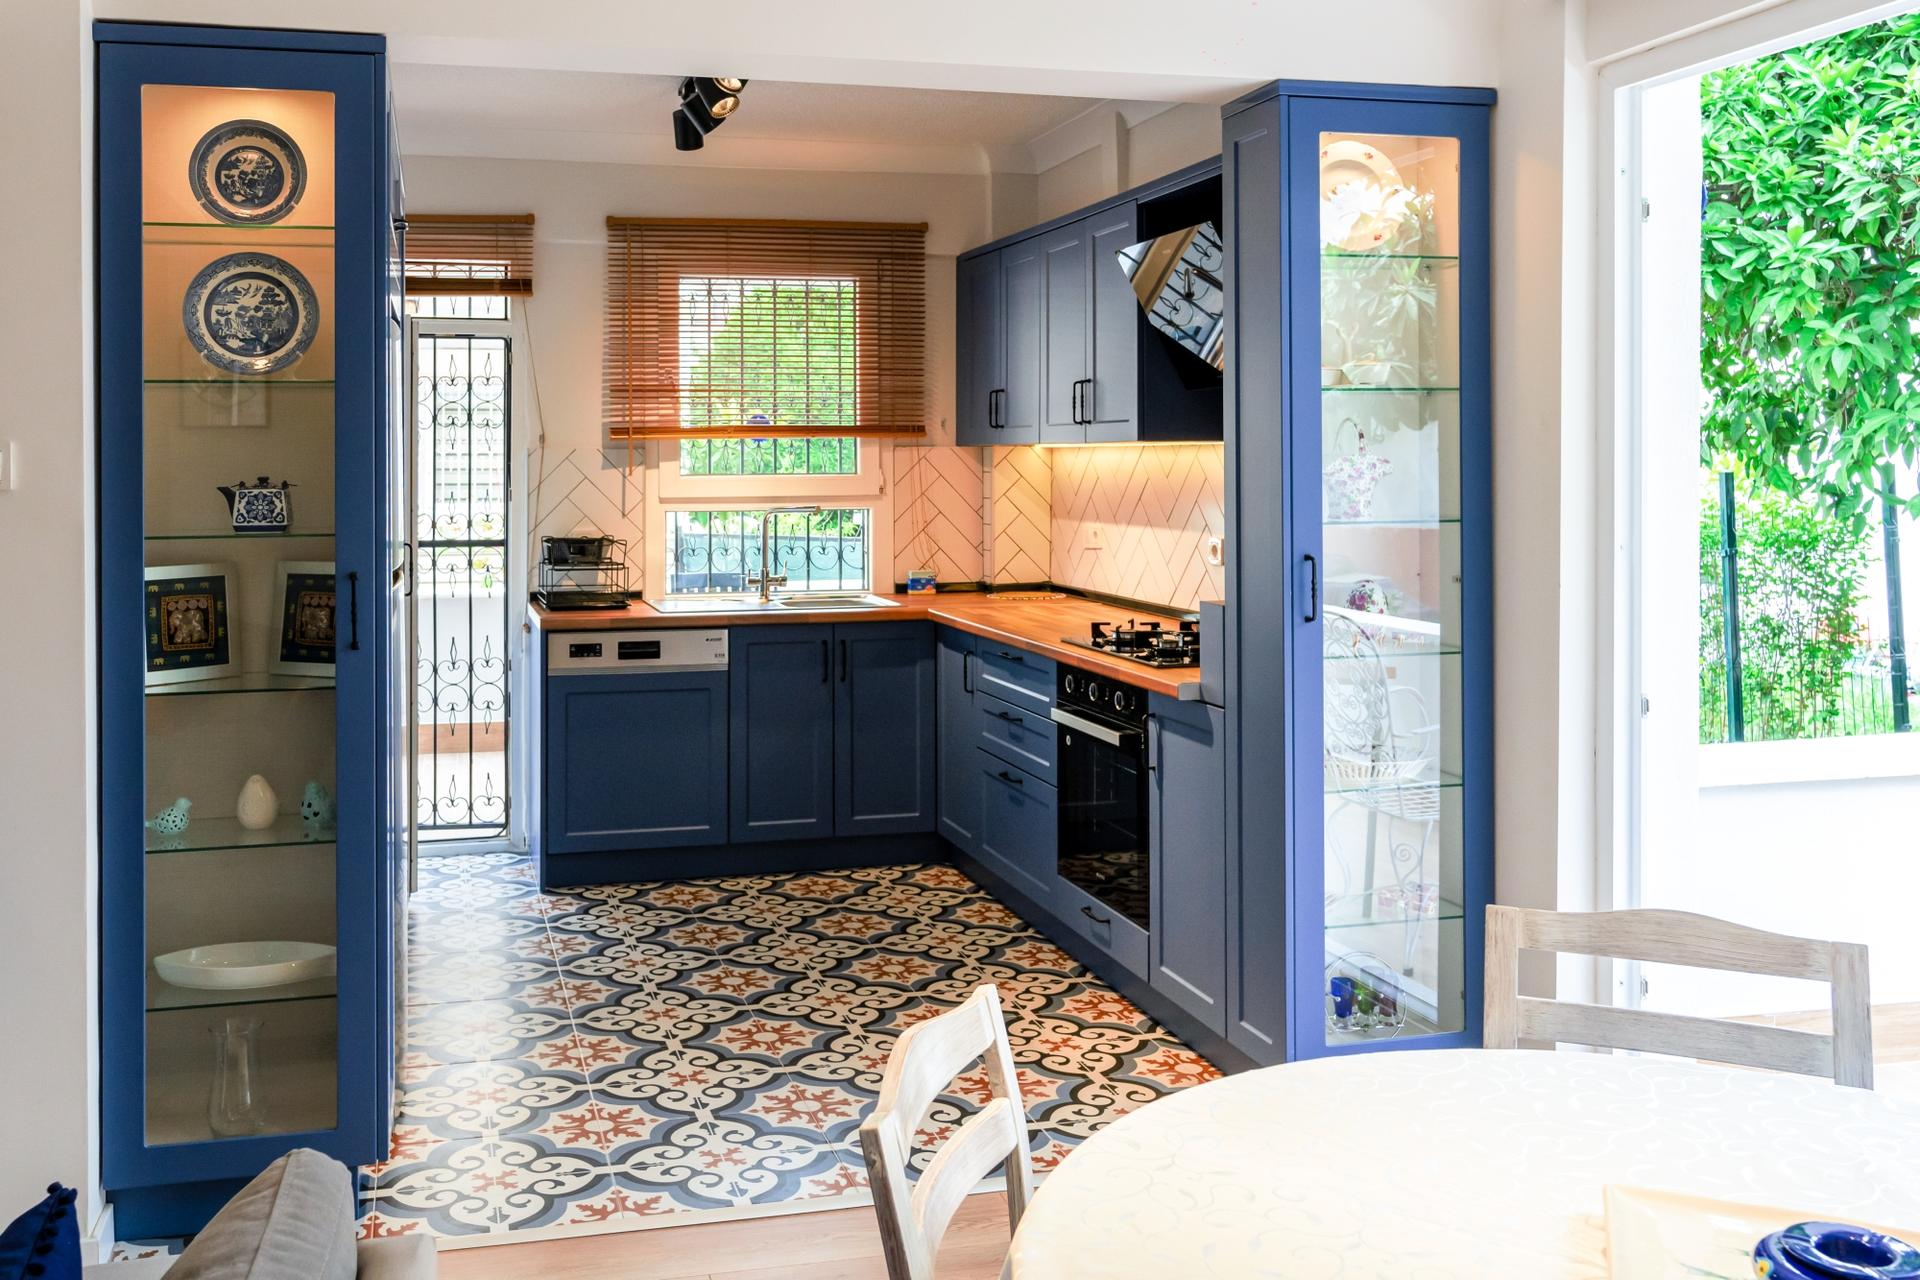 Our stylish American-style kitchen with blue tones and authentic mosaic tiles…